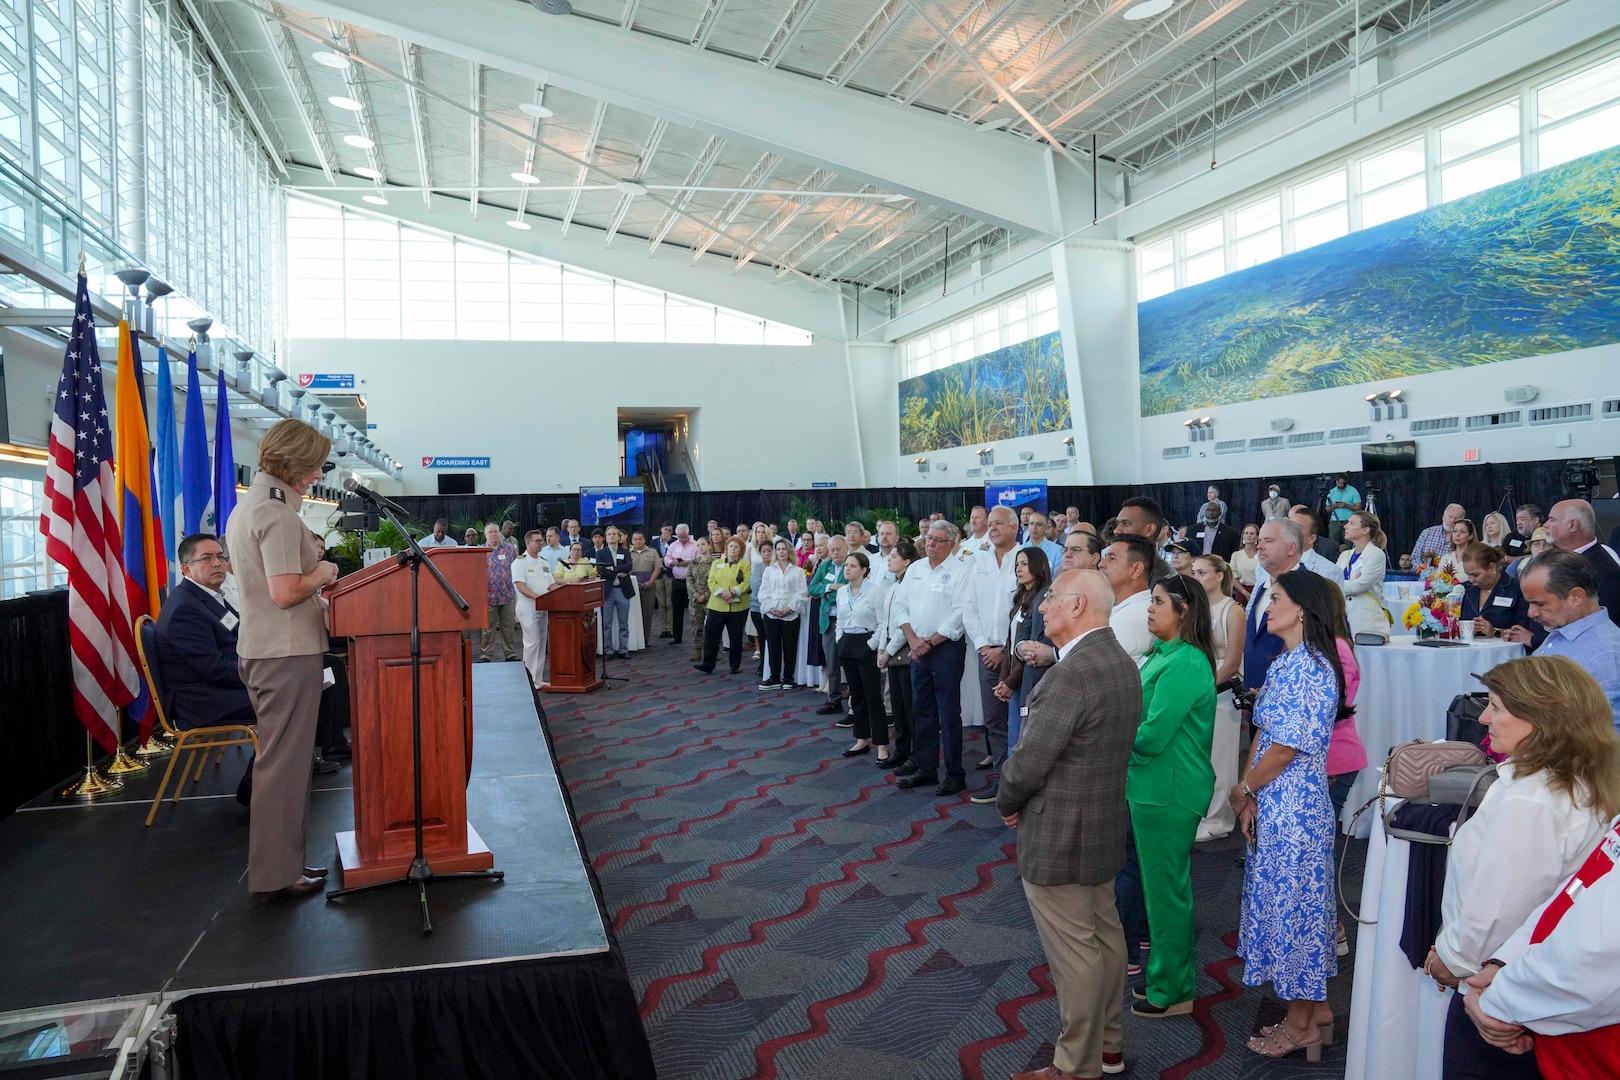 Army Gen. Laura Richardson, commander of U.S. Southern Command, speaks at a reception following the arrival of hospital ship USNS Comfort.